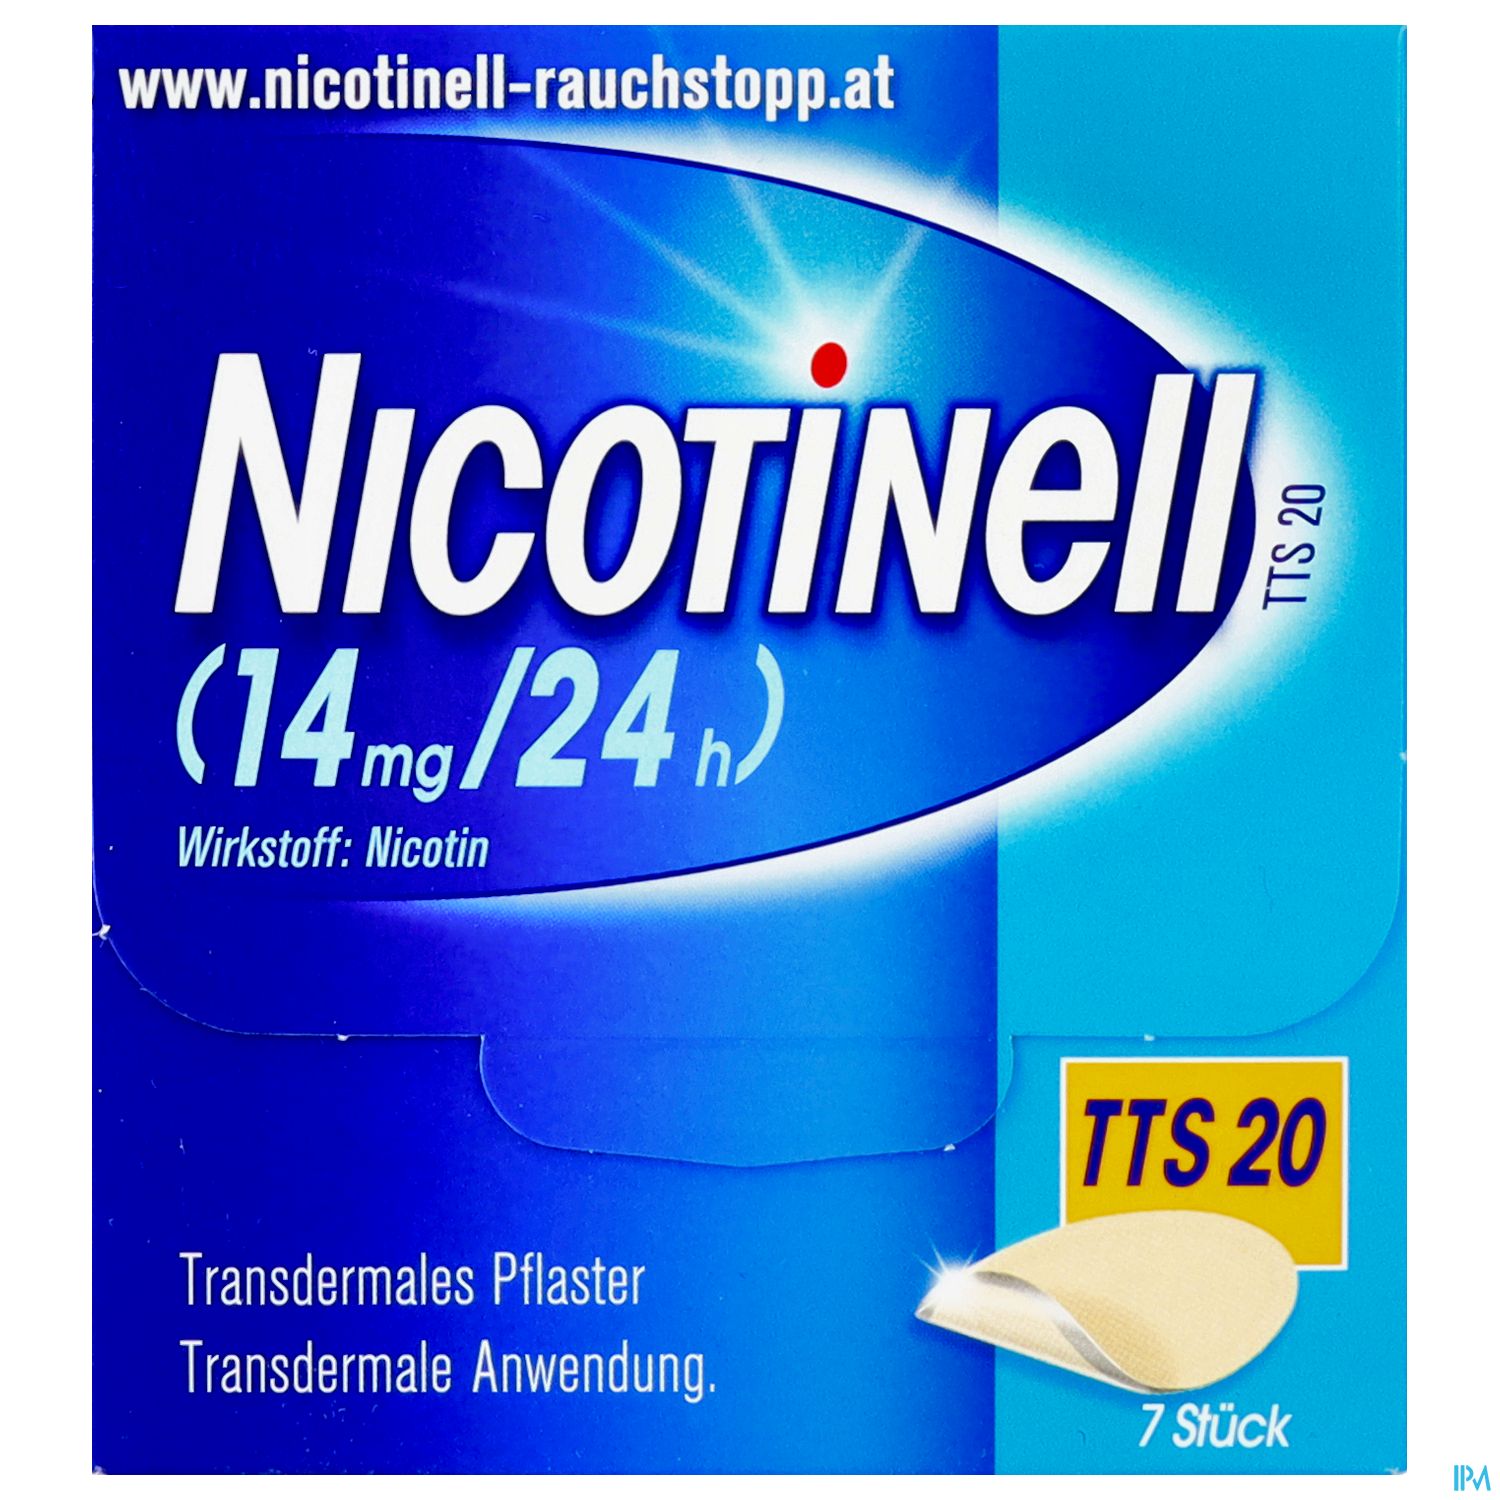 Nicotinell TTS 20 (14 mg/24 h) - transdermale Pflaster